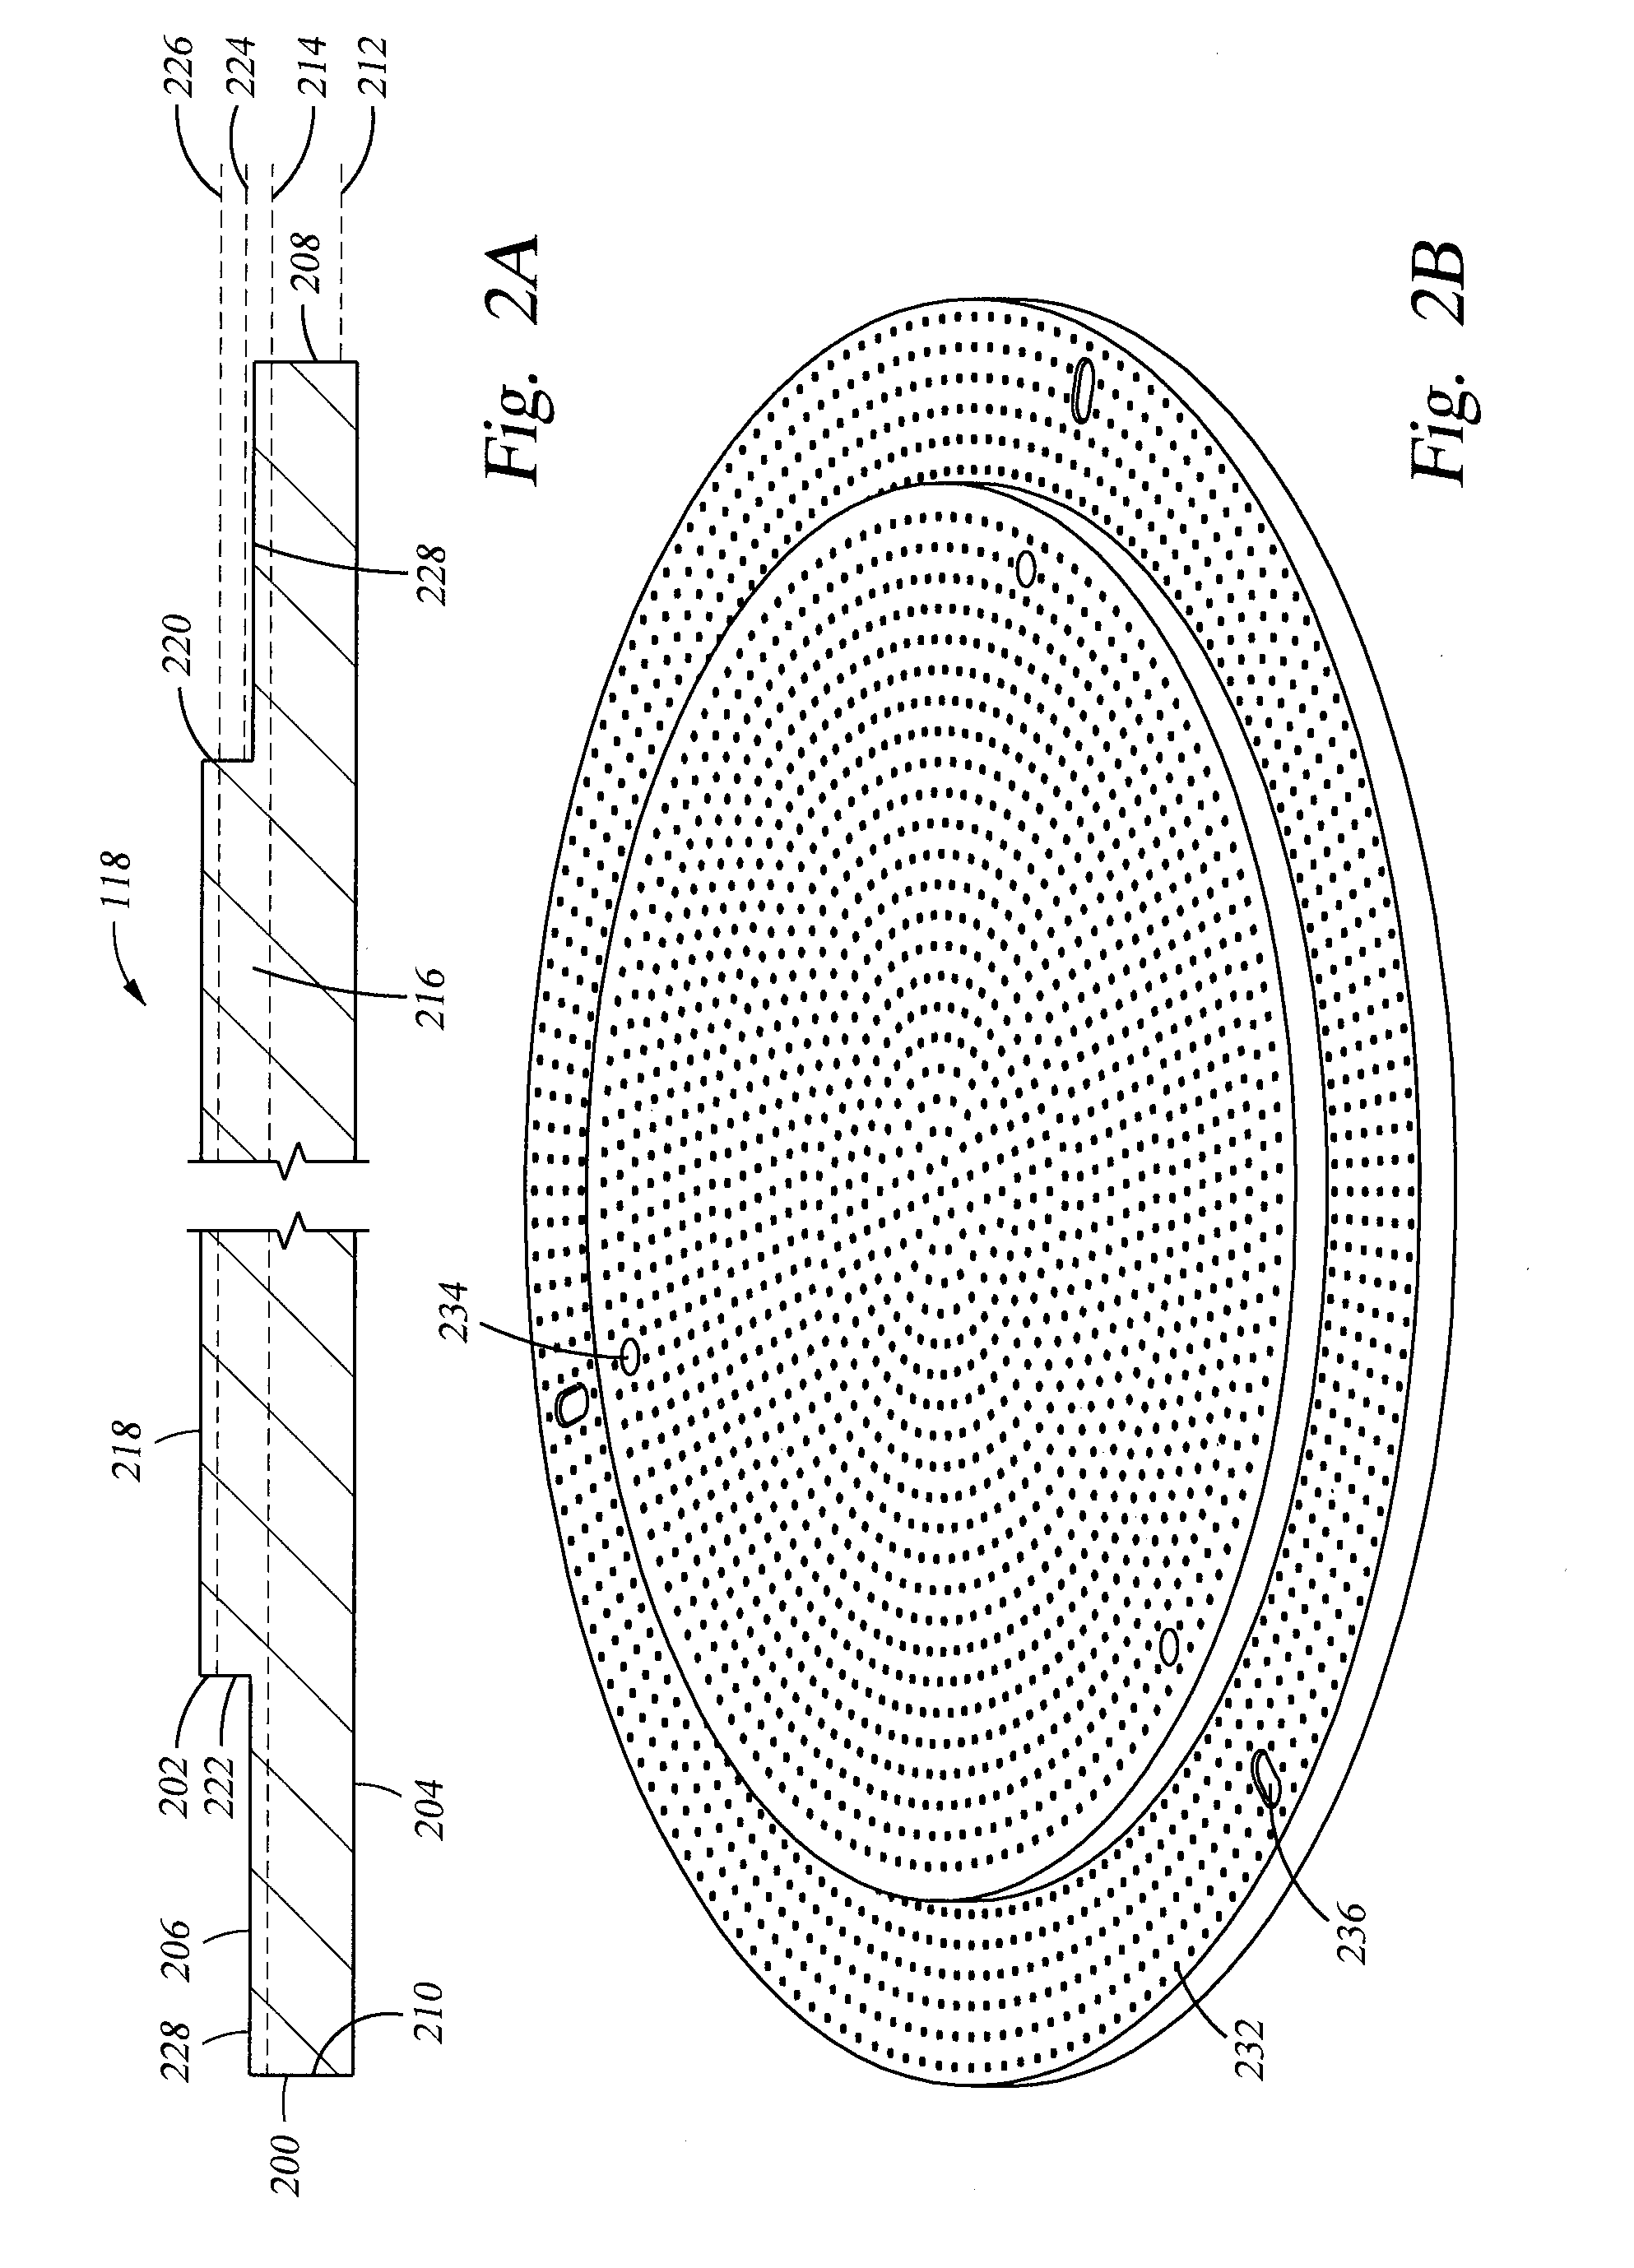 Support assembly for substrate backside discoloration control